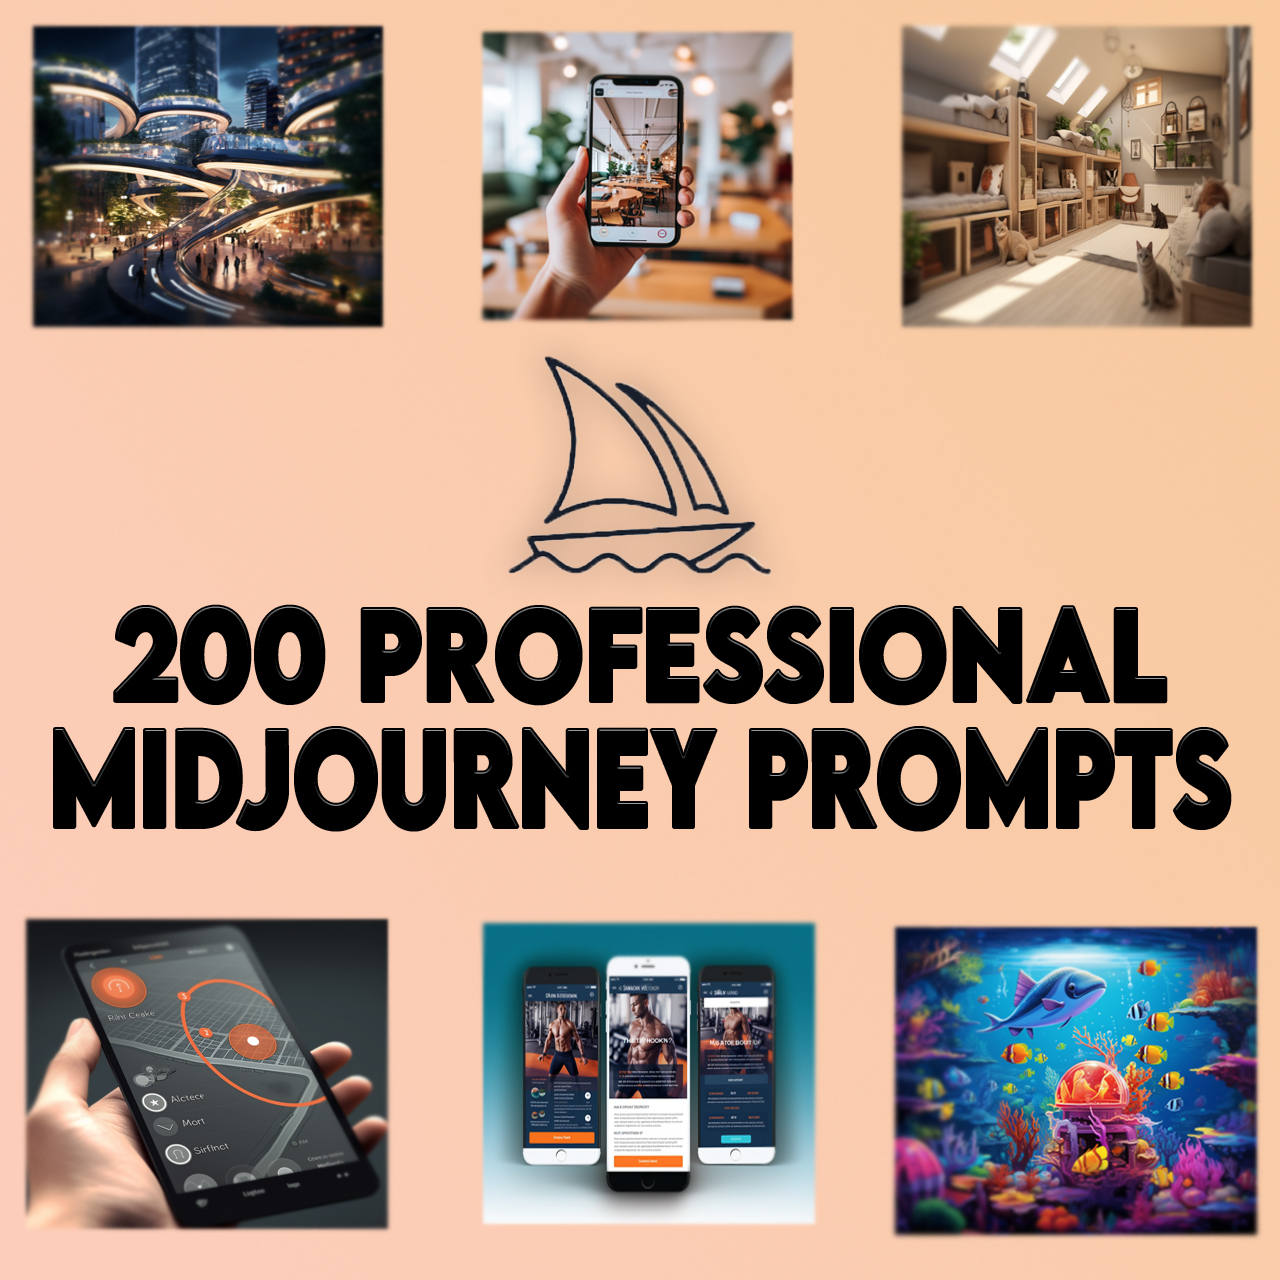 200 professional prompts midjourney – Expert crafted